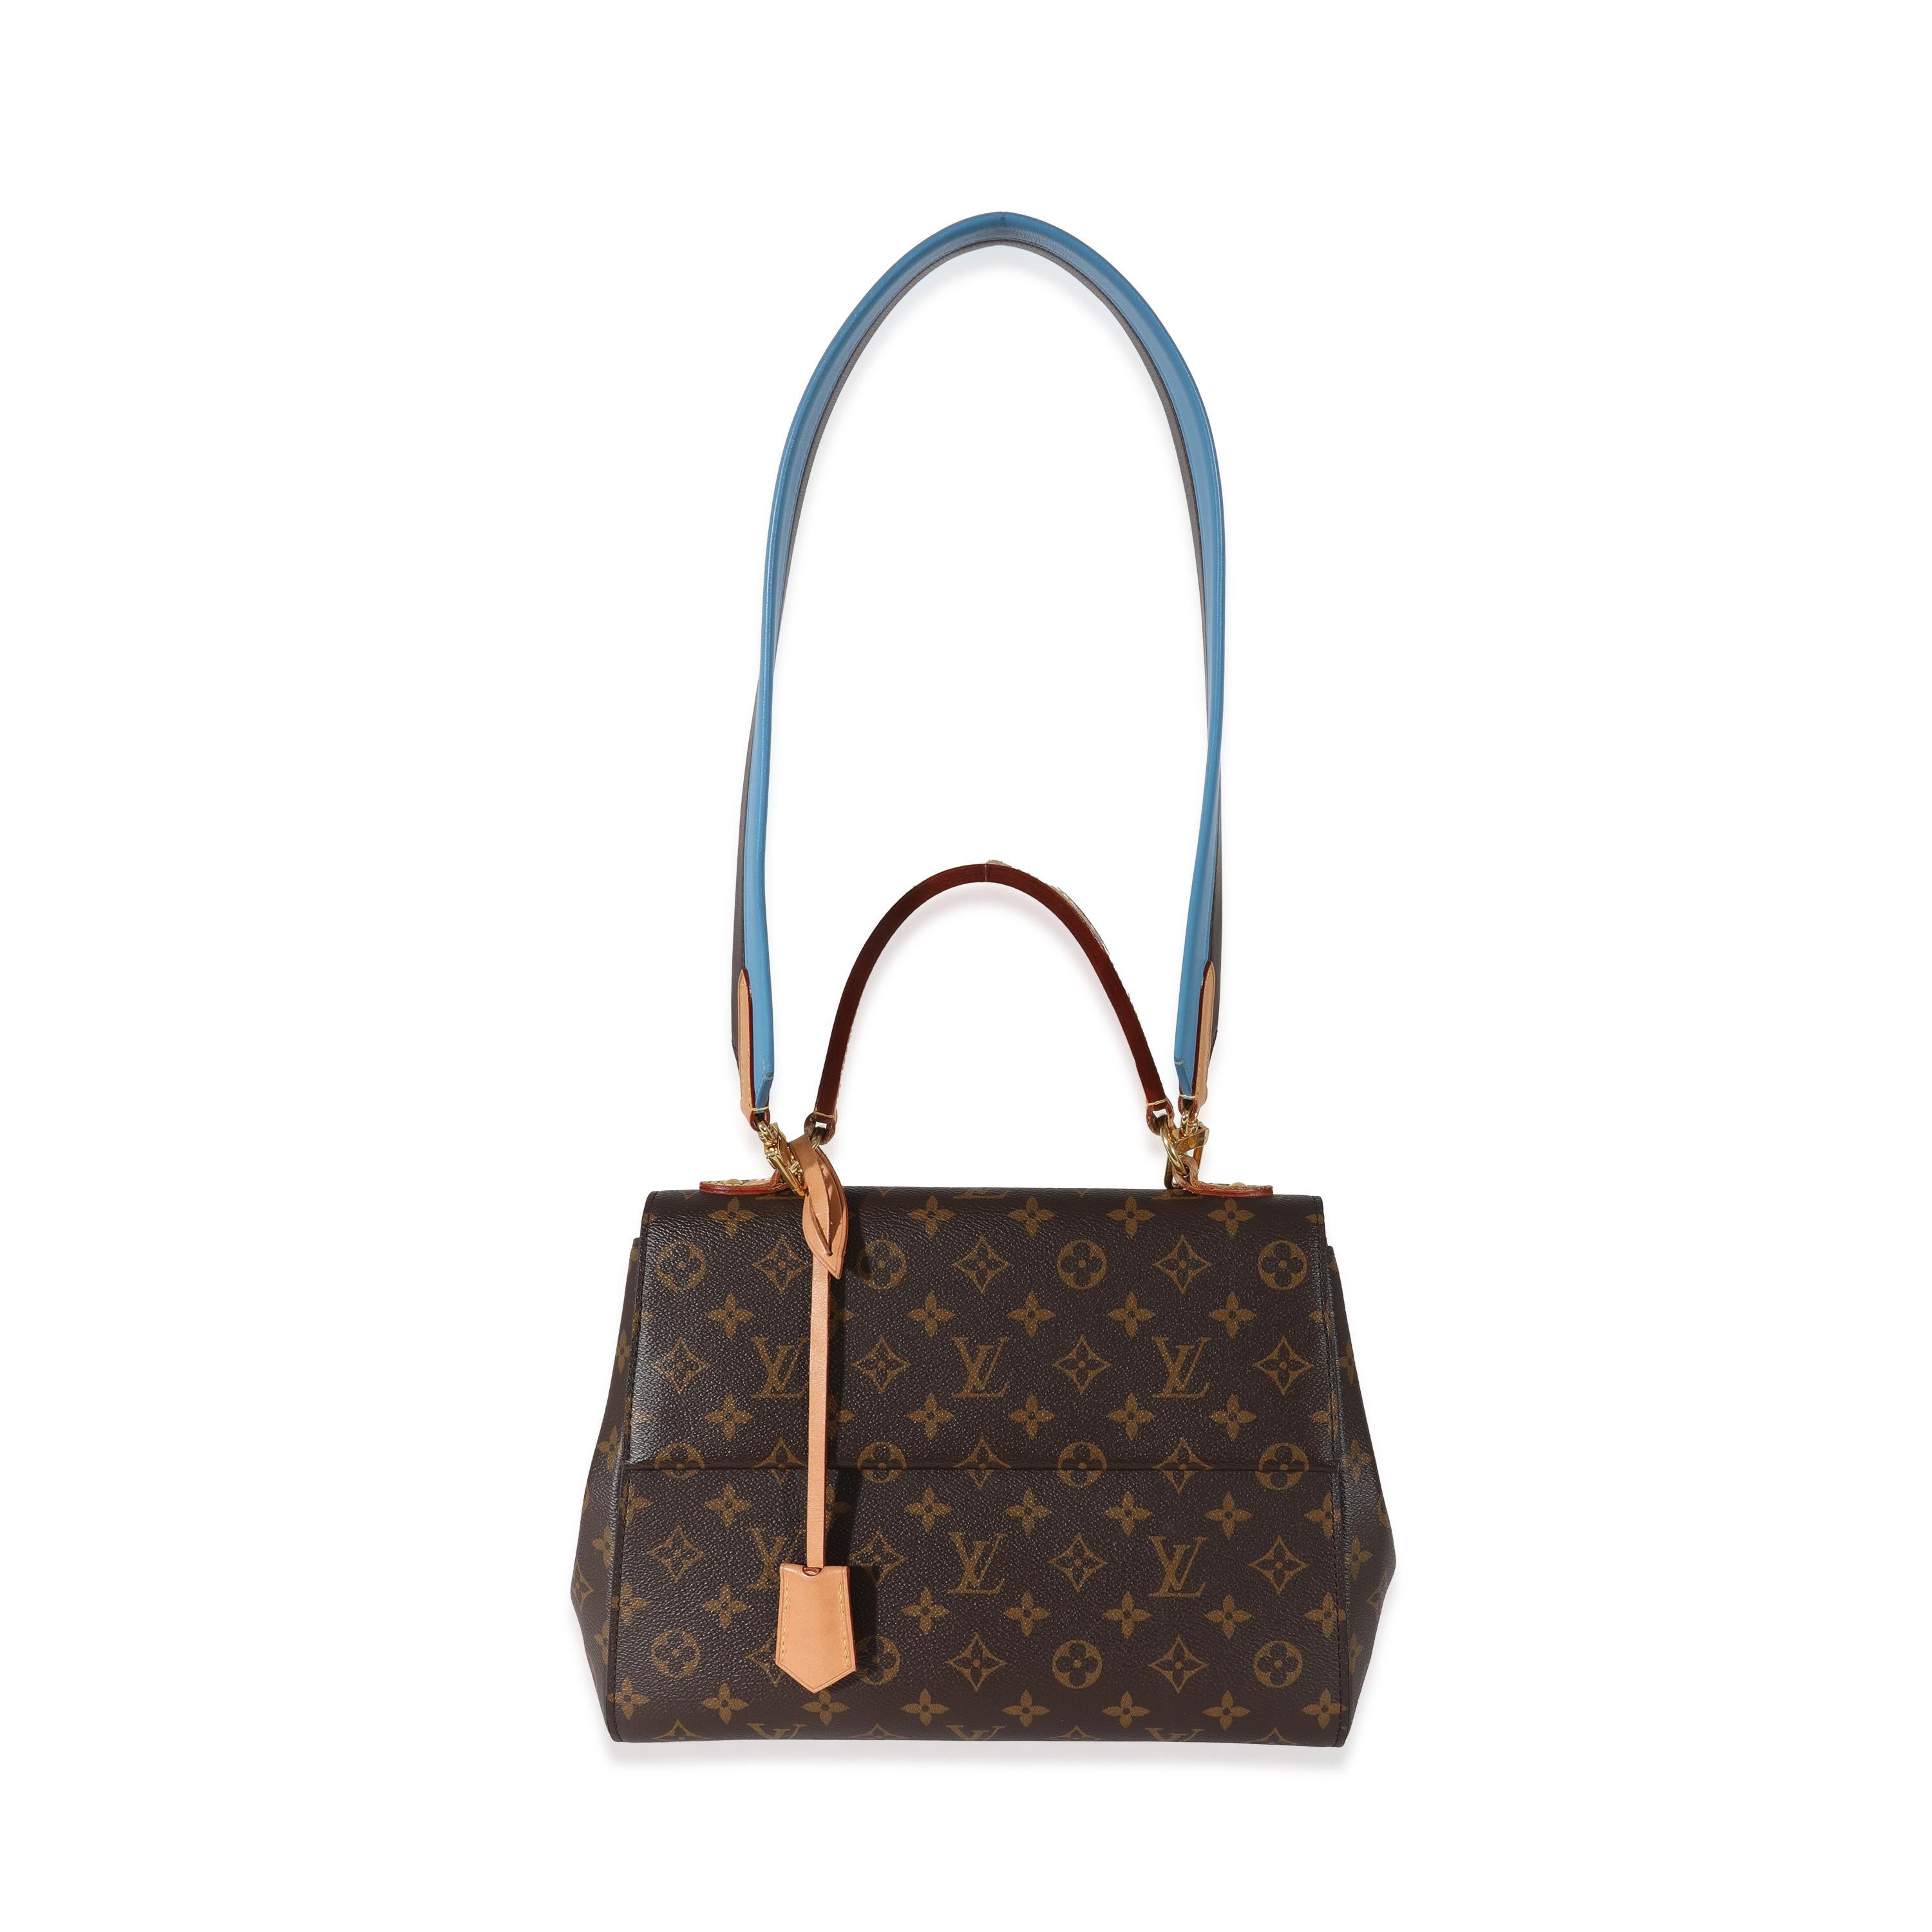 Listing Title: Louis Vuitton Monogram Canvas Blue Glacial Cluny MM
SKU: 130127

MSRP: 2570.00 USD
Condition: Pre-owned 
Handbag Condition: Very Good
Condition Comments: Item is in very good condition with minor signs of wear. Heavy patina at